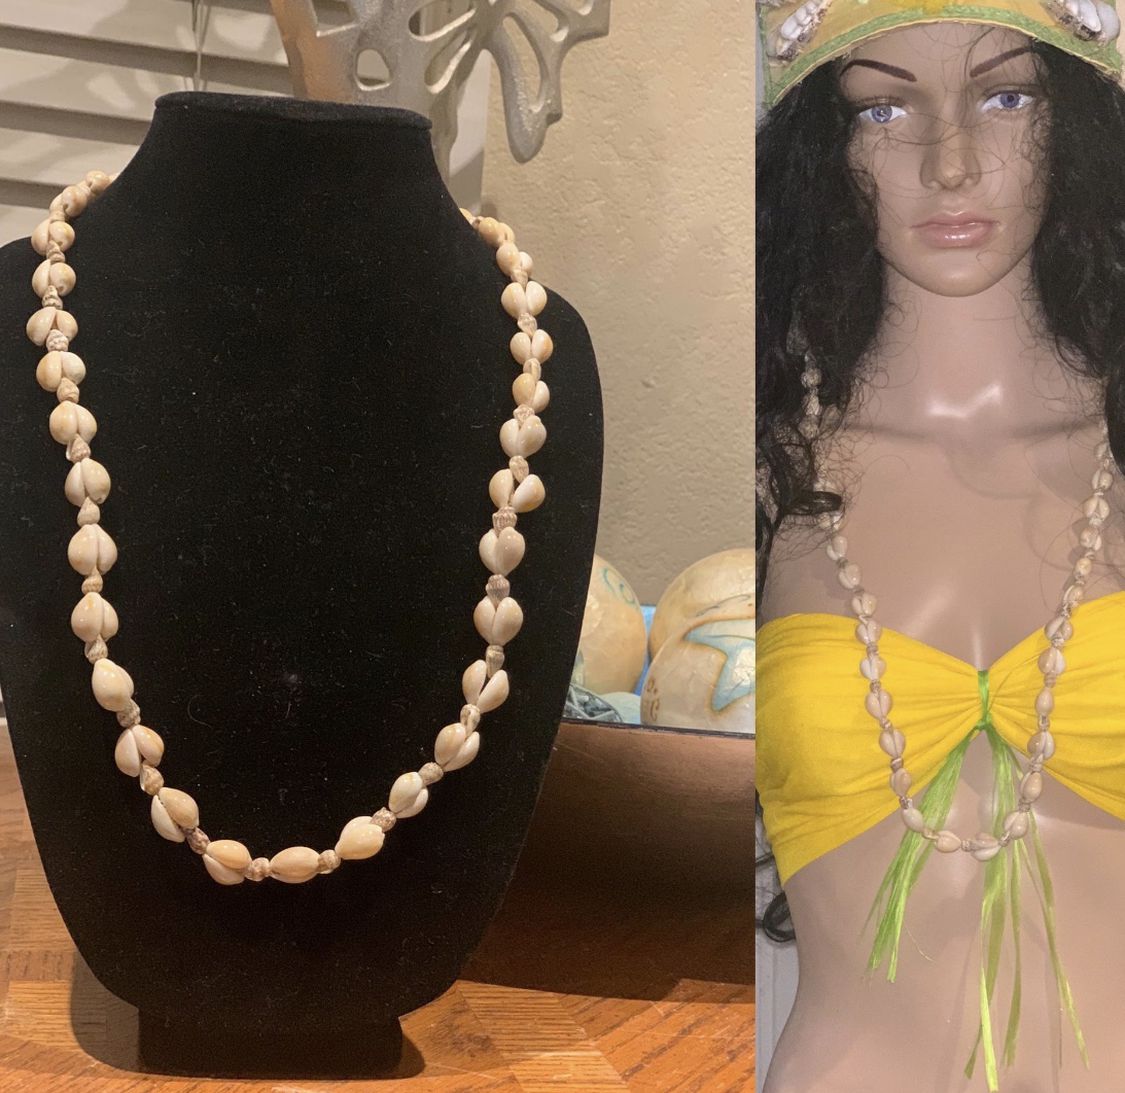 Hawaiian shell necklaces- $4 for one or buy as a set of 10 for $35